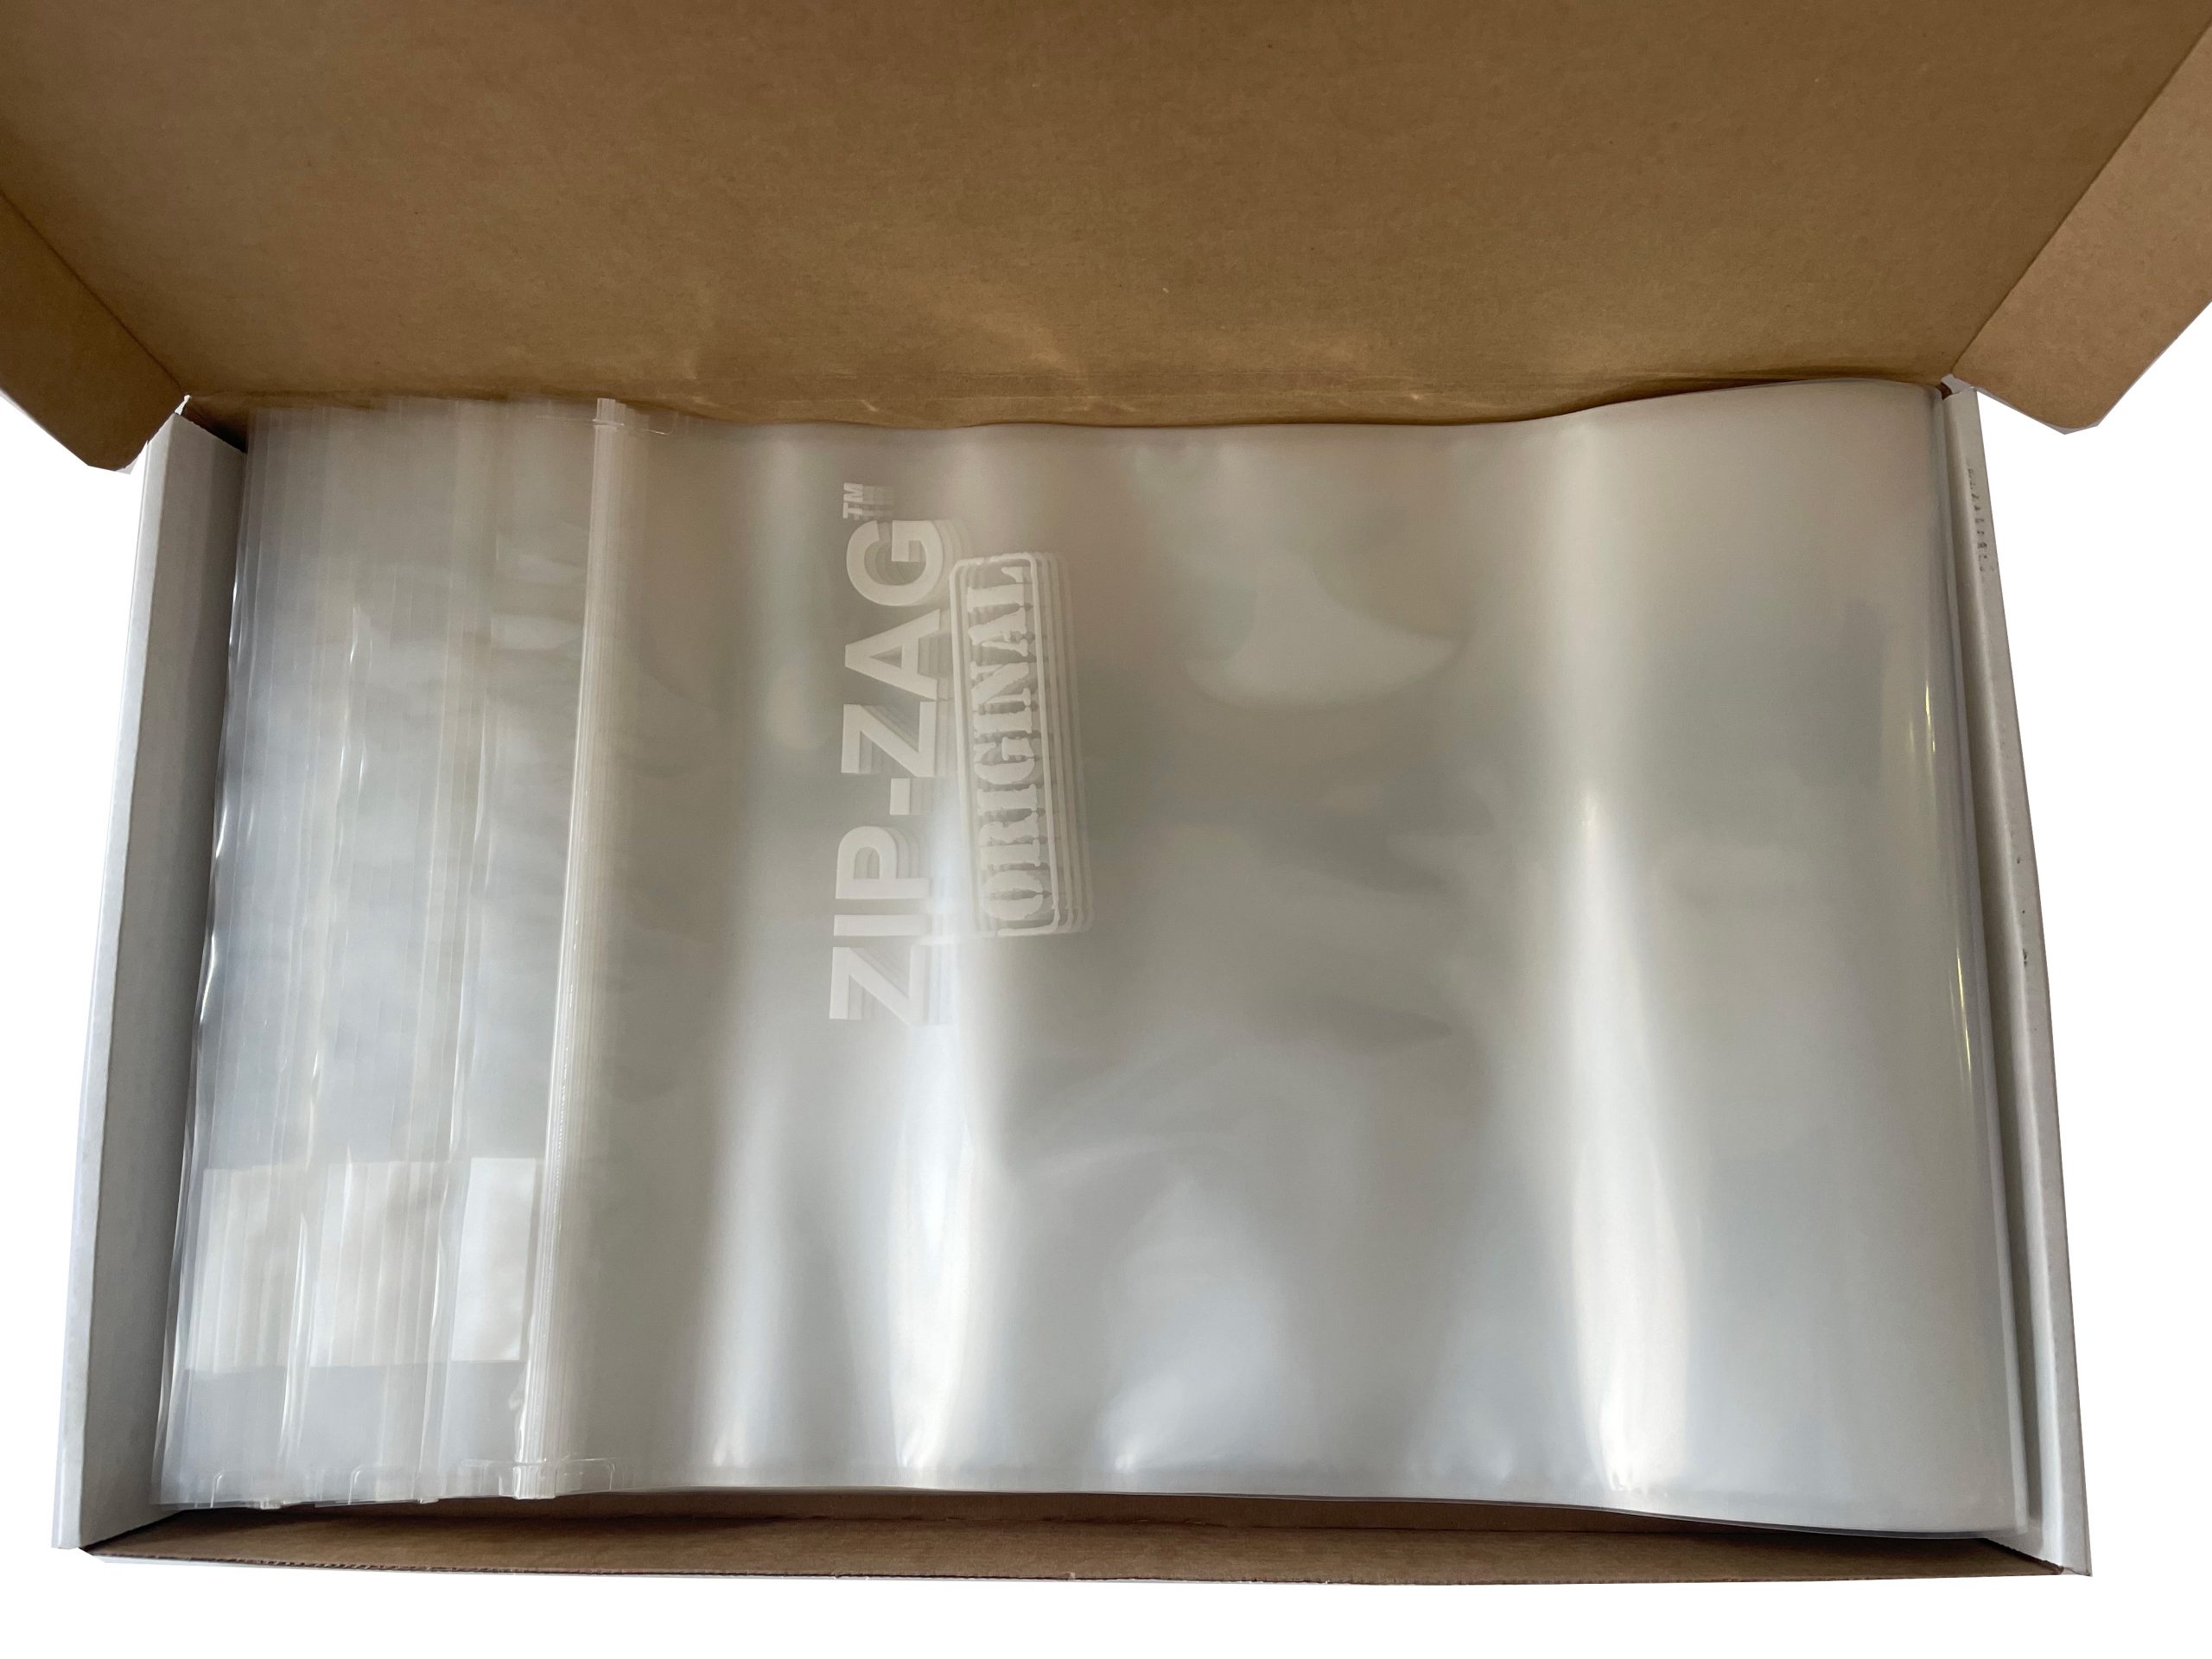 Zip-Zag BLACK 50 Half Pound Bags - Airtight Bags, Resealable, Reusable,  Anti-Puncture, Washable, Food Safe, Treated for no Static, for Dry Herbs  and